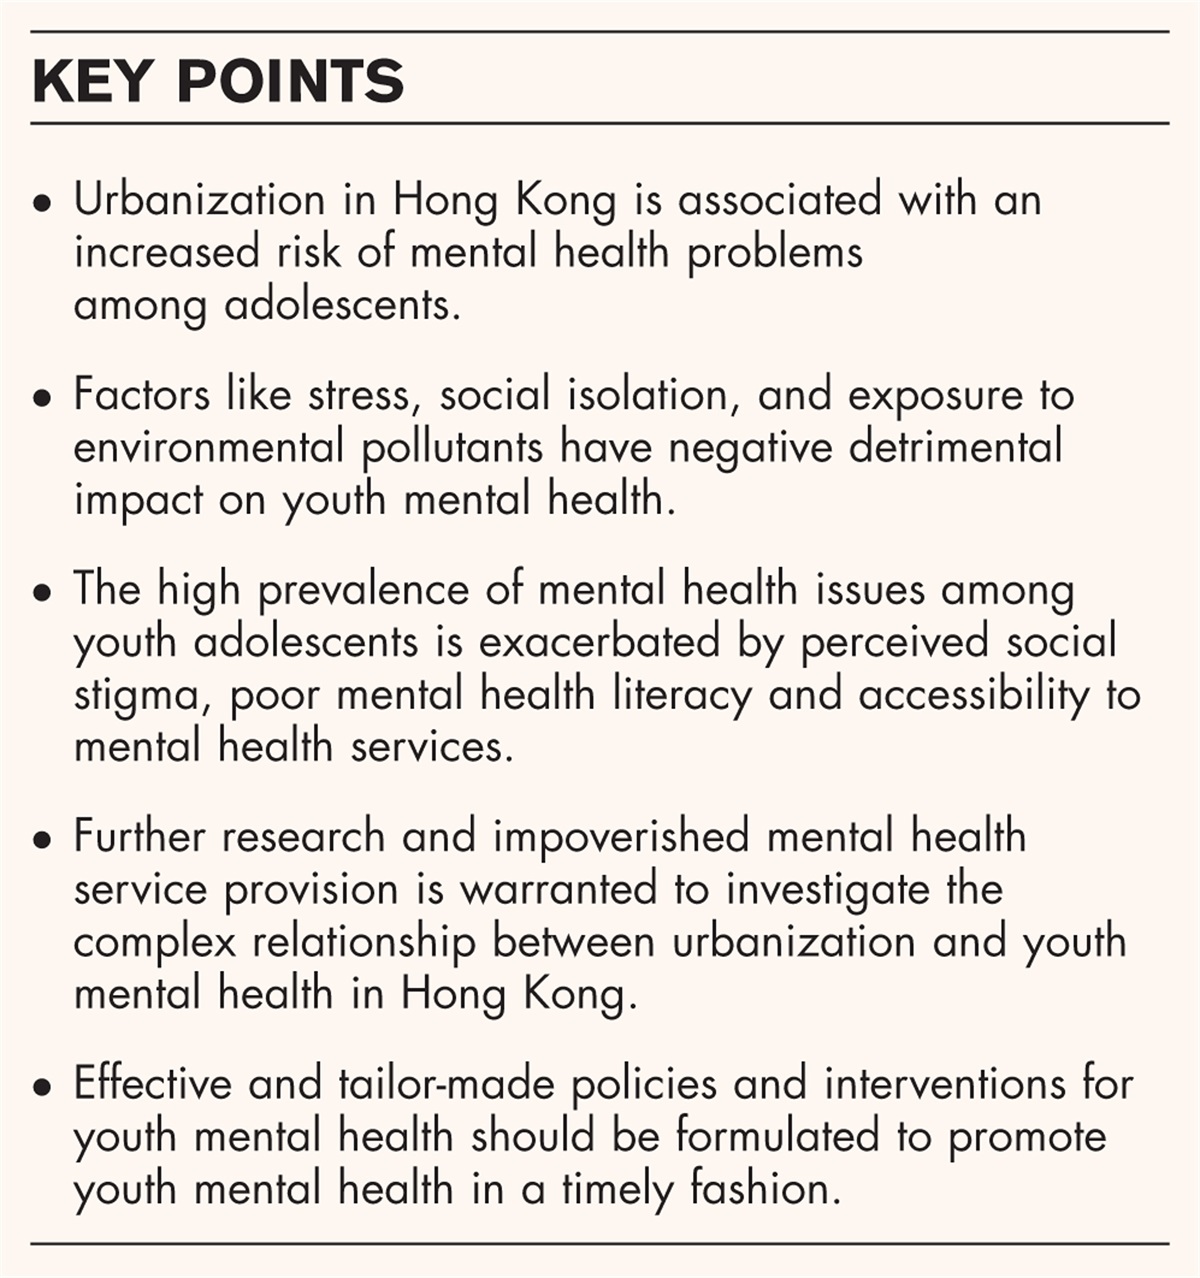 The impact of urbanization on youth mental health in Hong Kong